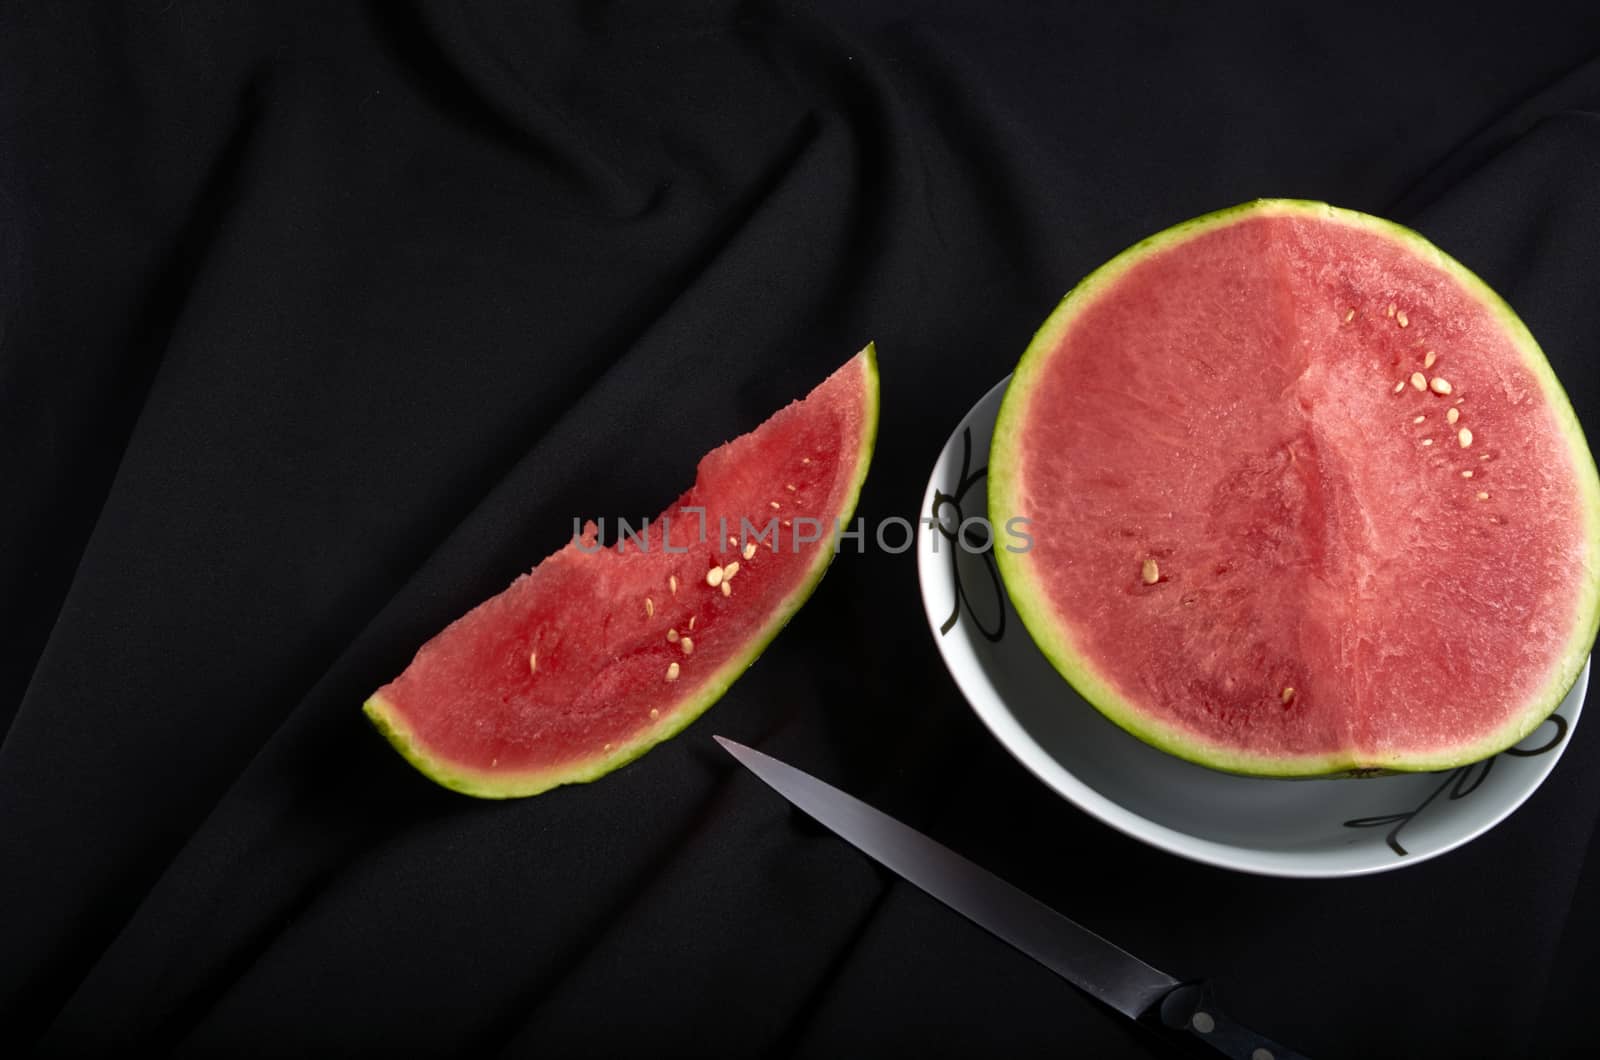 Image slice of watermelon with bite black background